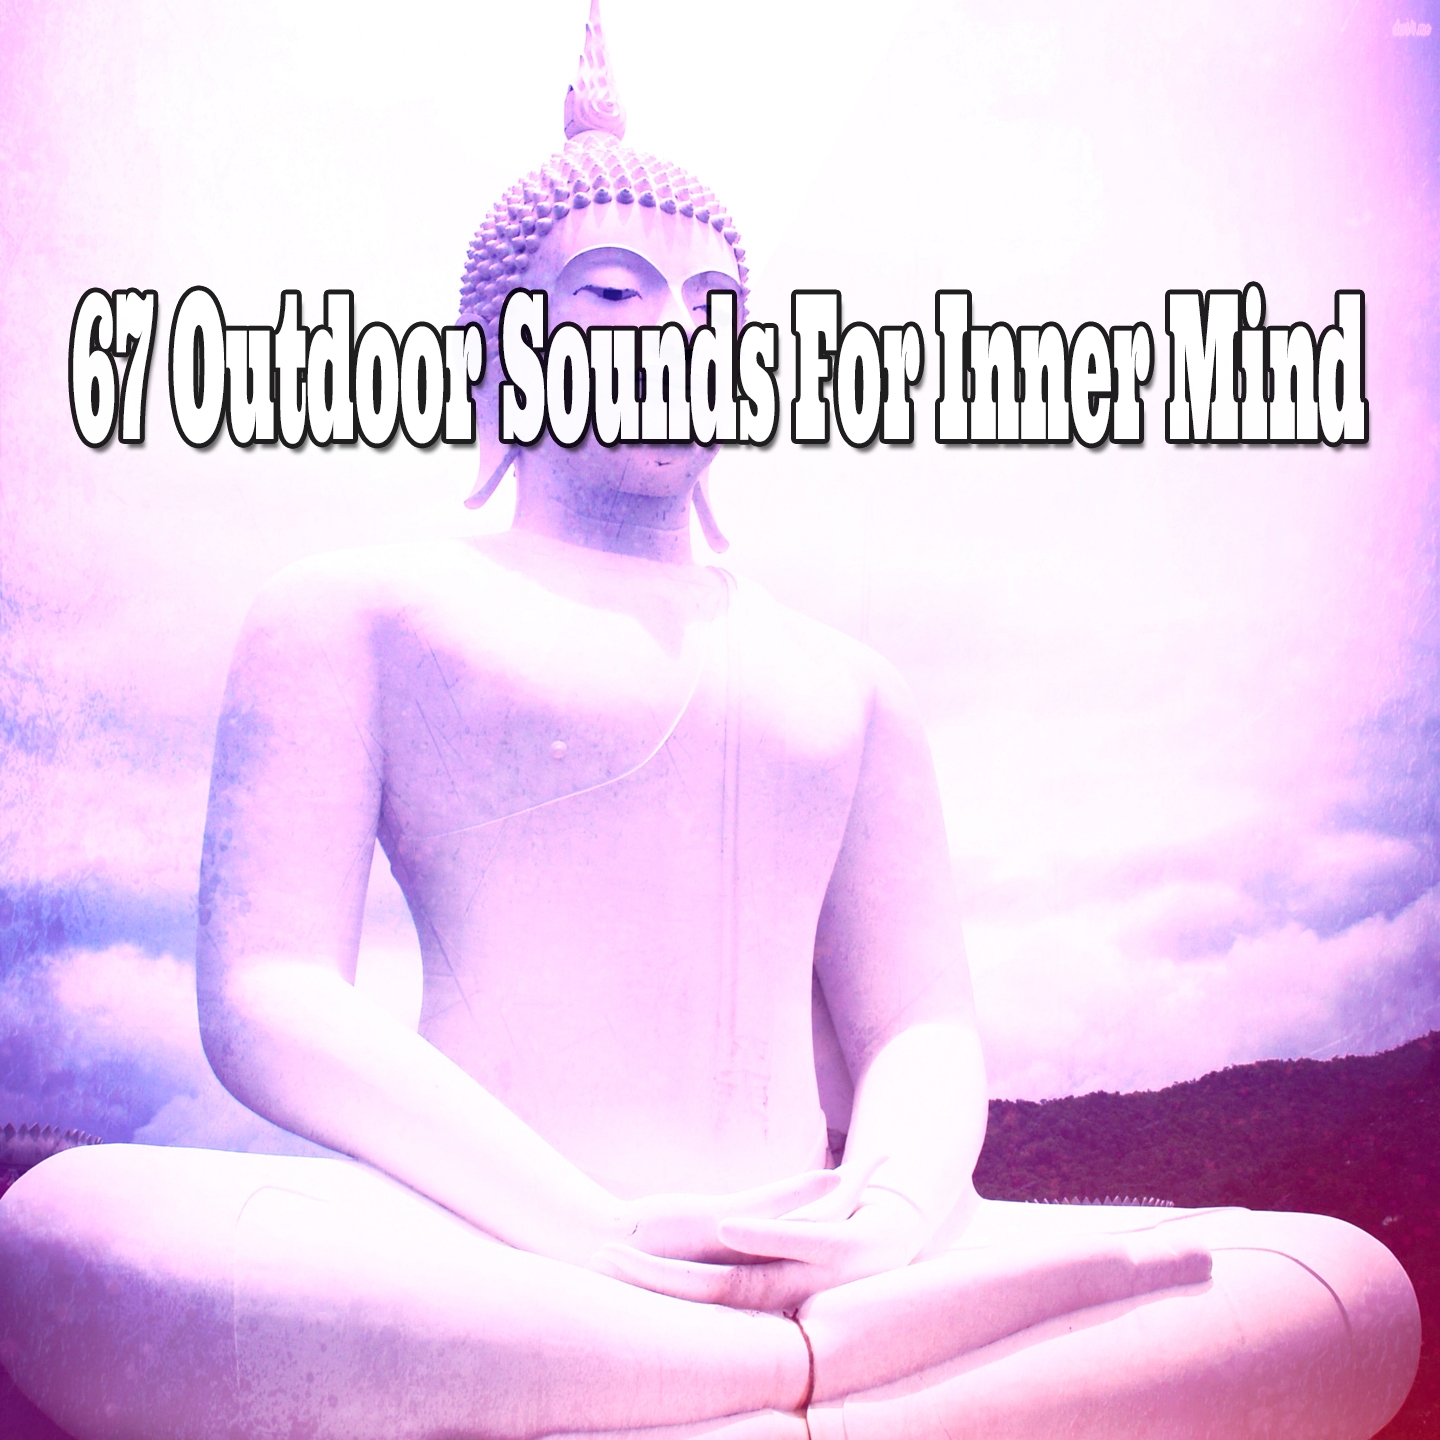 67 Outdoor Sounds For Inner Mind